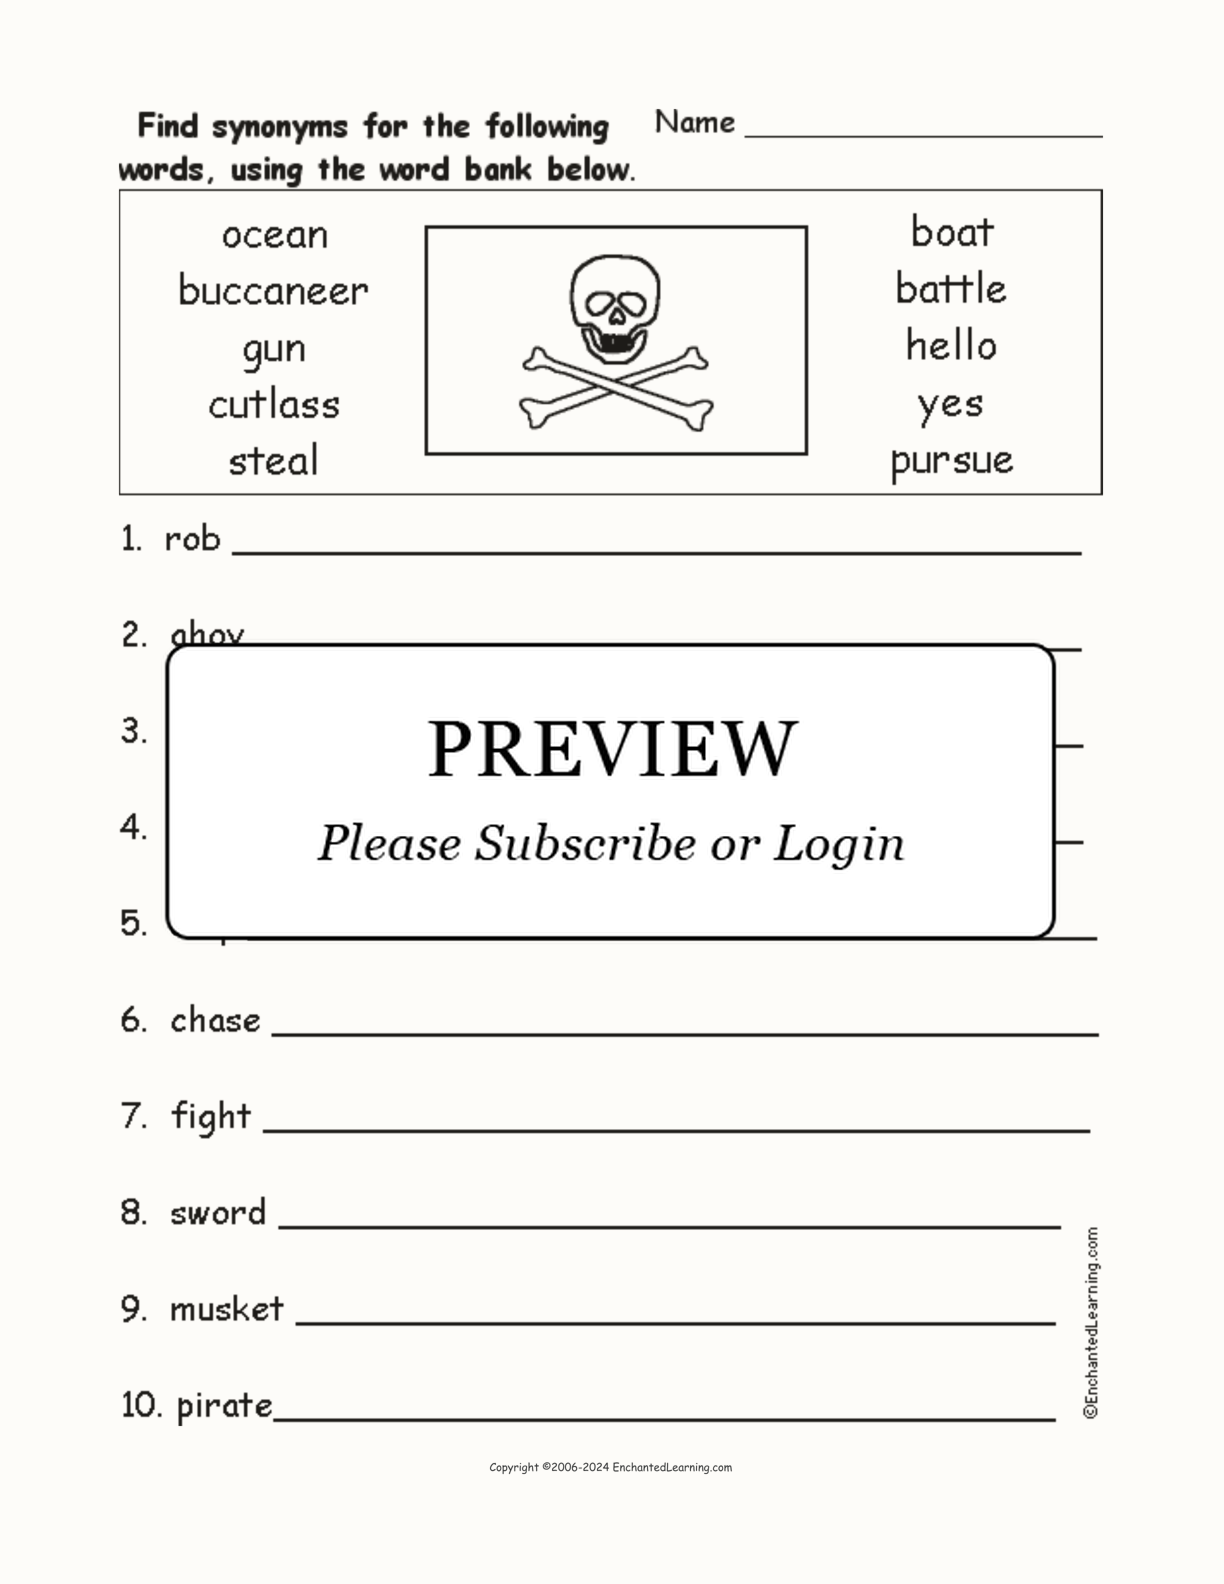 Pirate Synonyms Worksheet interactive worksheet page 1